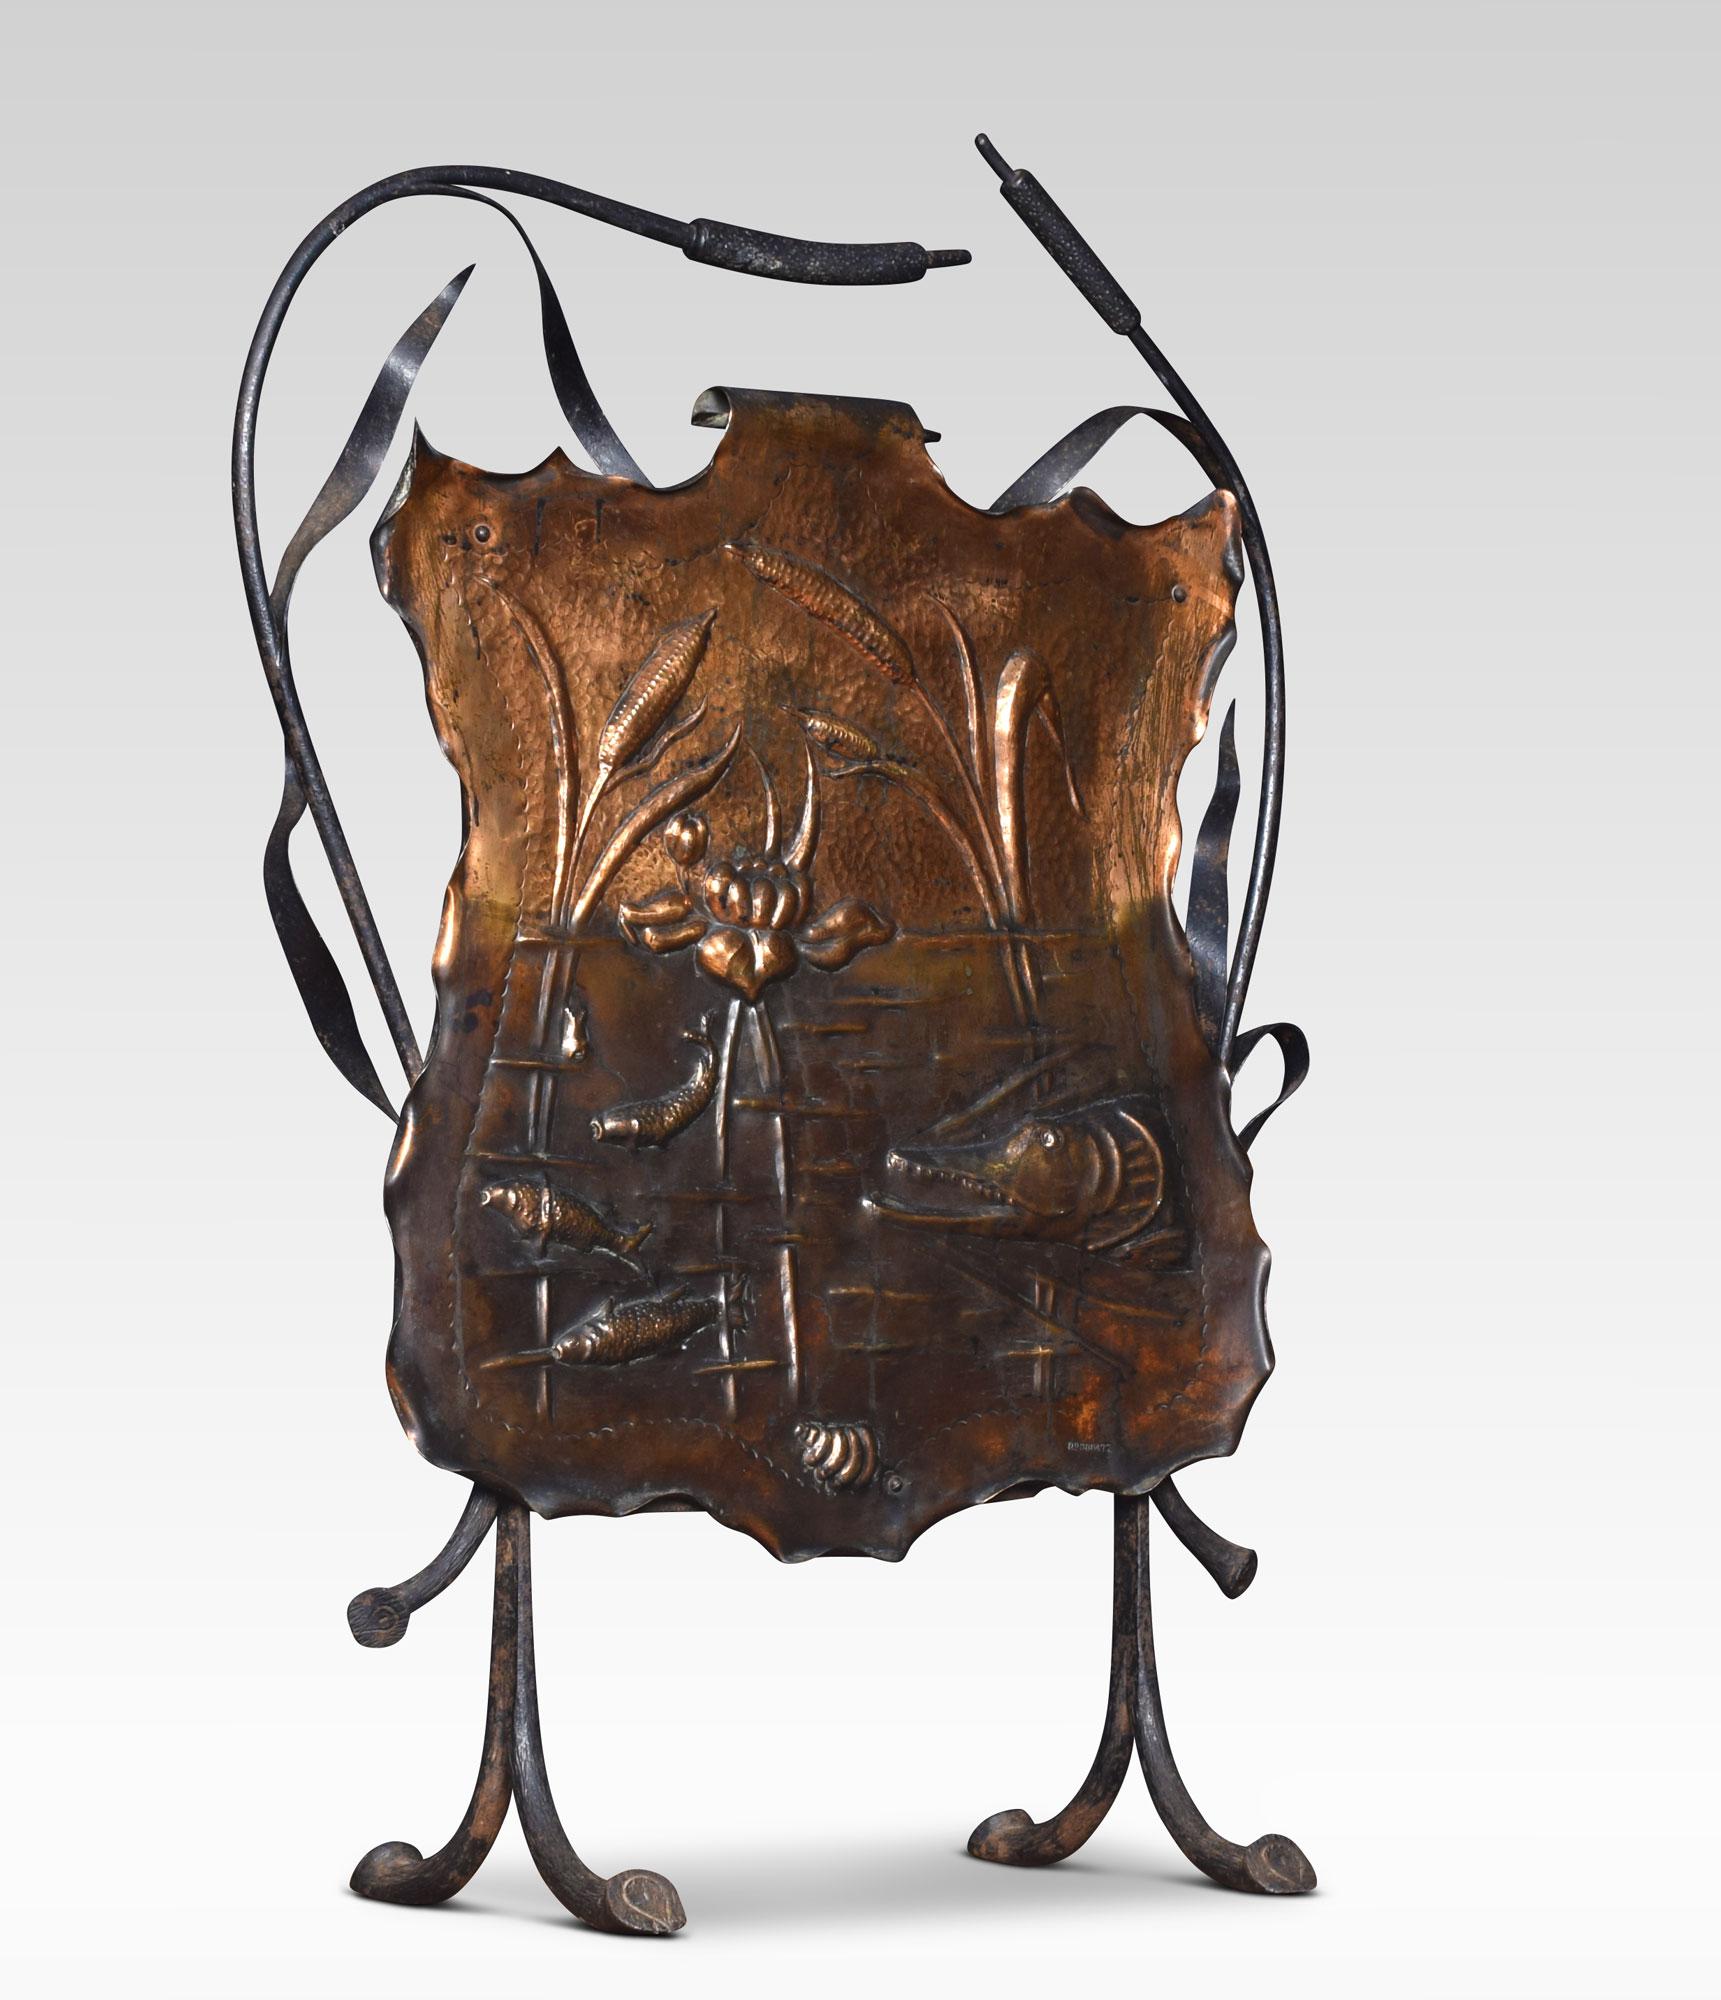 Unusual 19th century copper fire screen depicting a pike in a lake with foliated decoration supported on twin supports and stylized bullrushes.
Dimensions:
Height 32 inches
Length 22.5 inches
Width 10 inches.